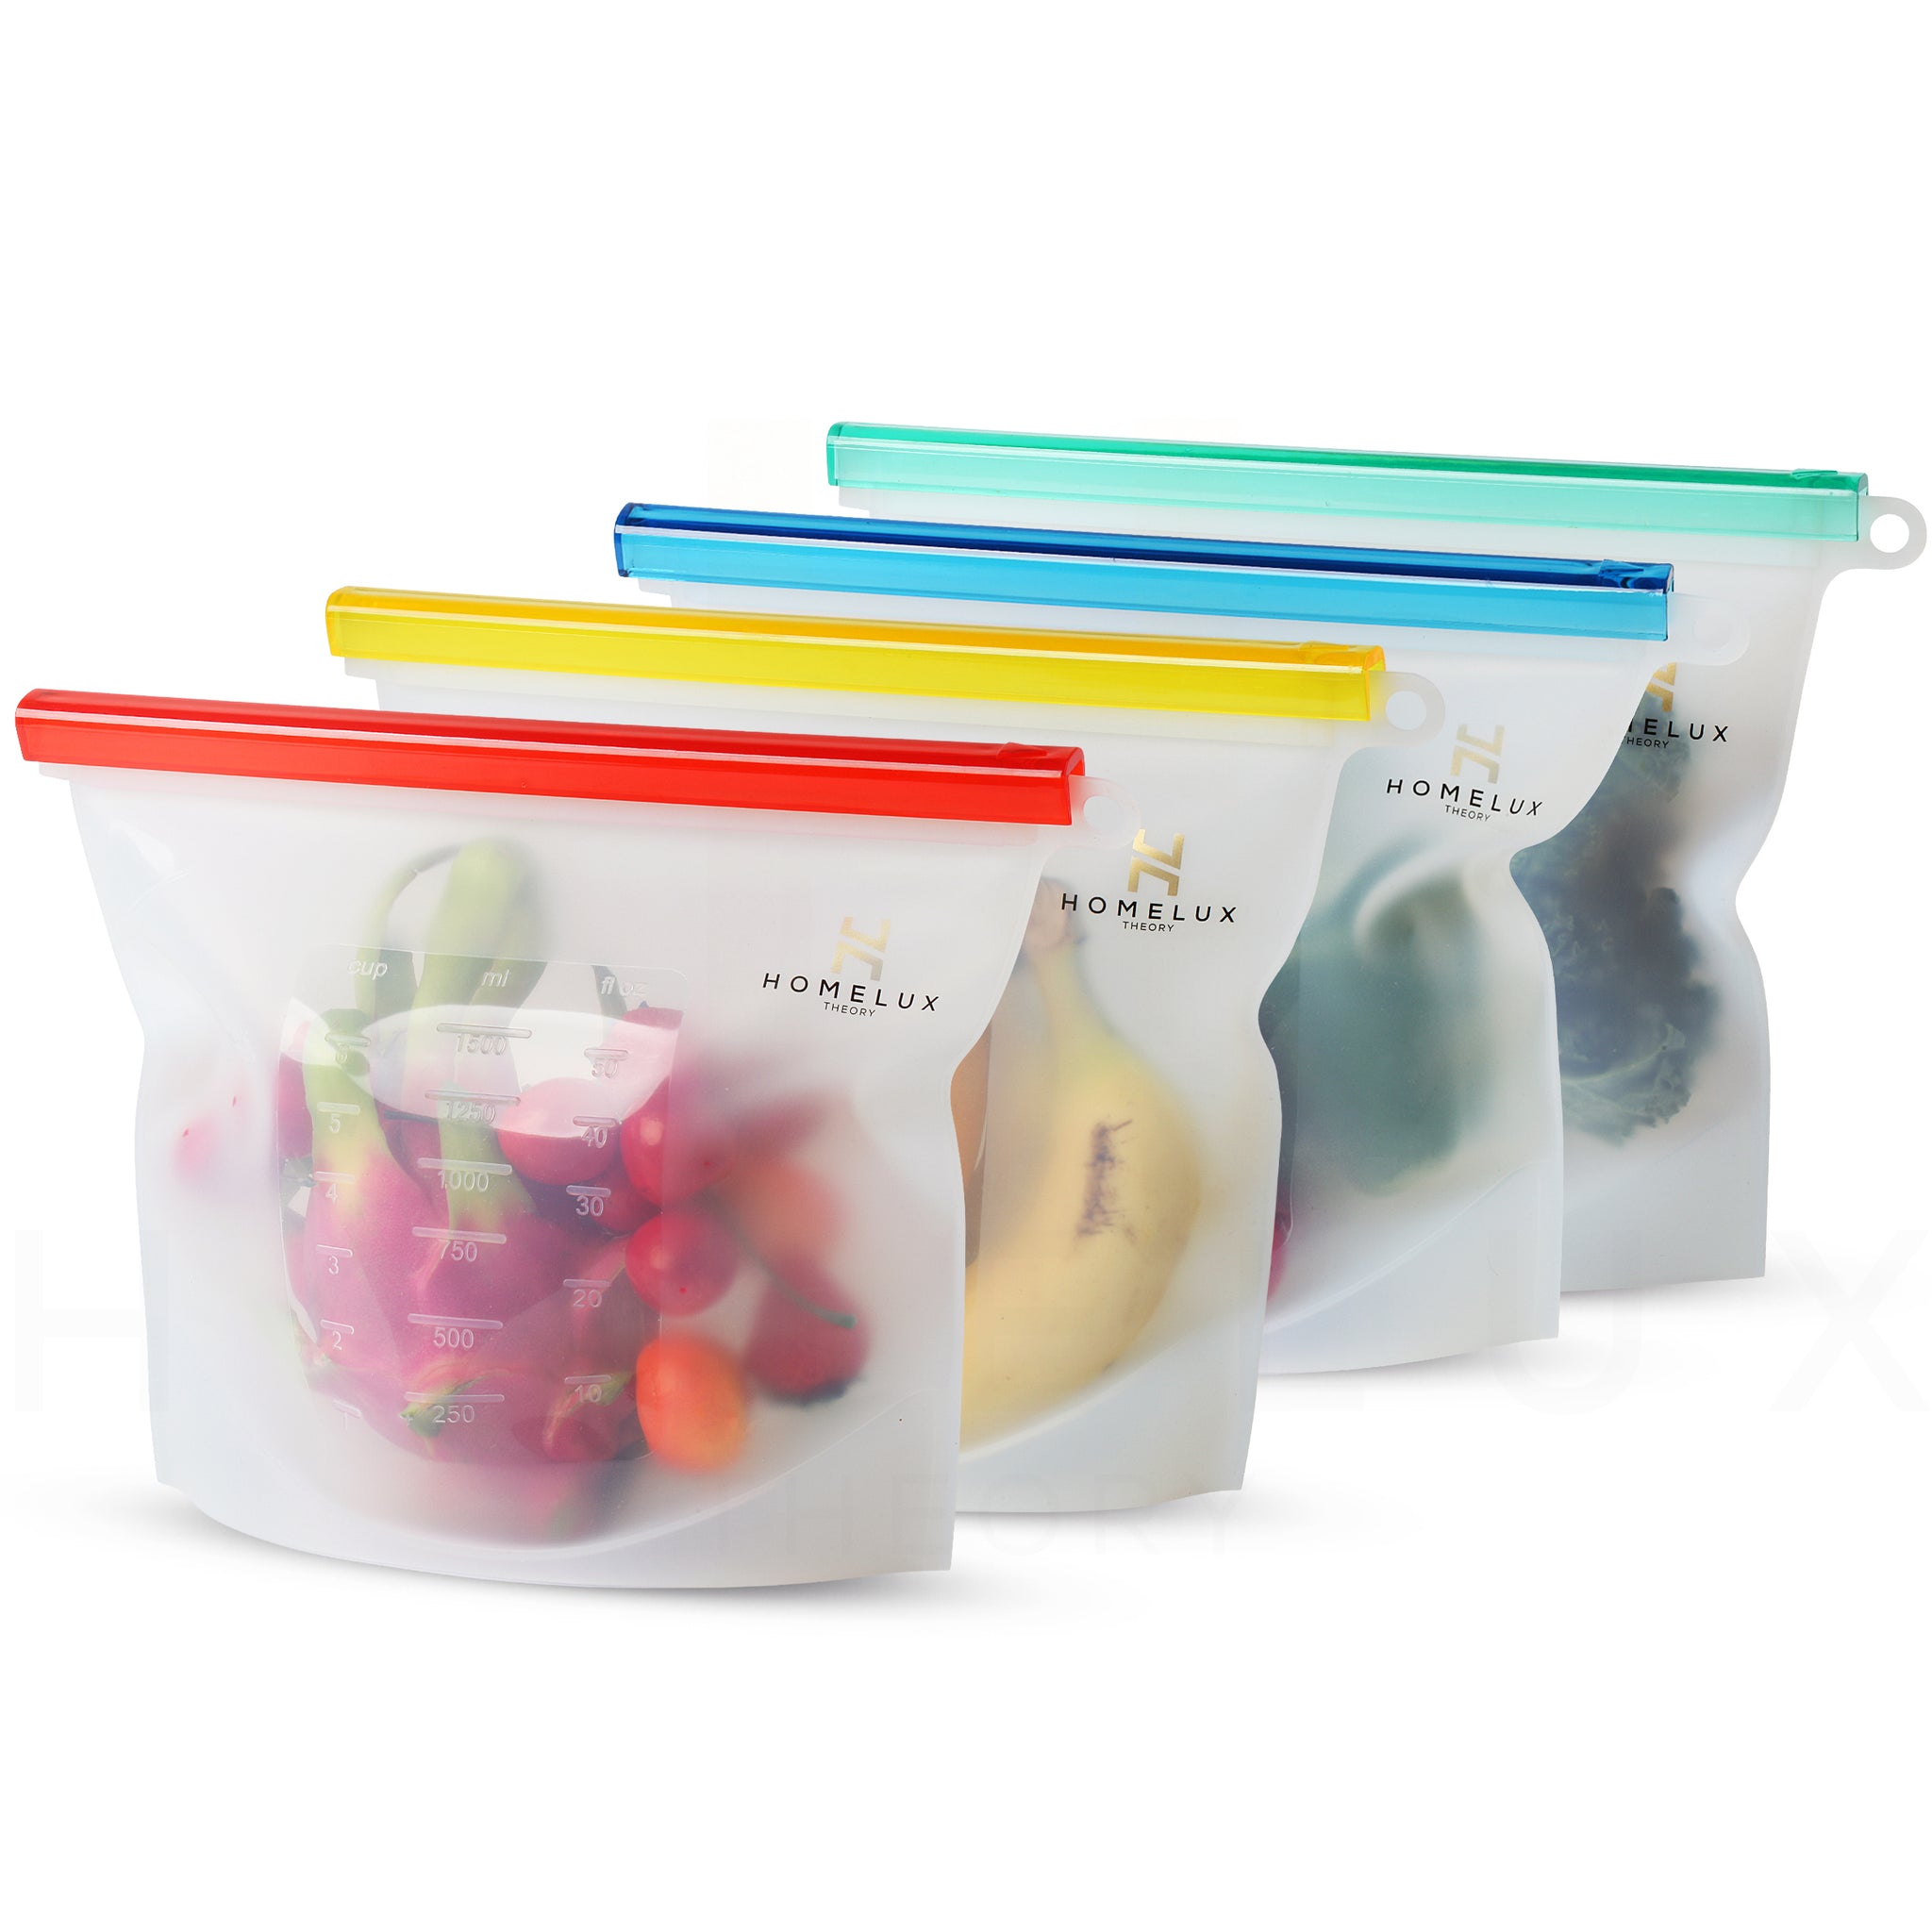 Favorite Silicone Food Storage Bags: Reusable